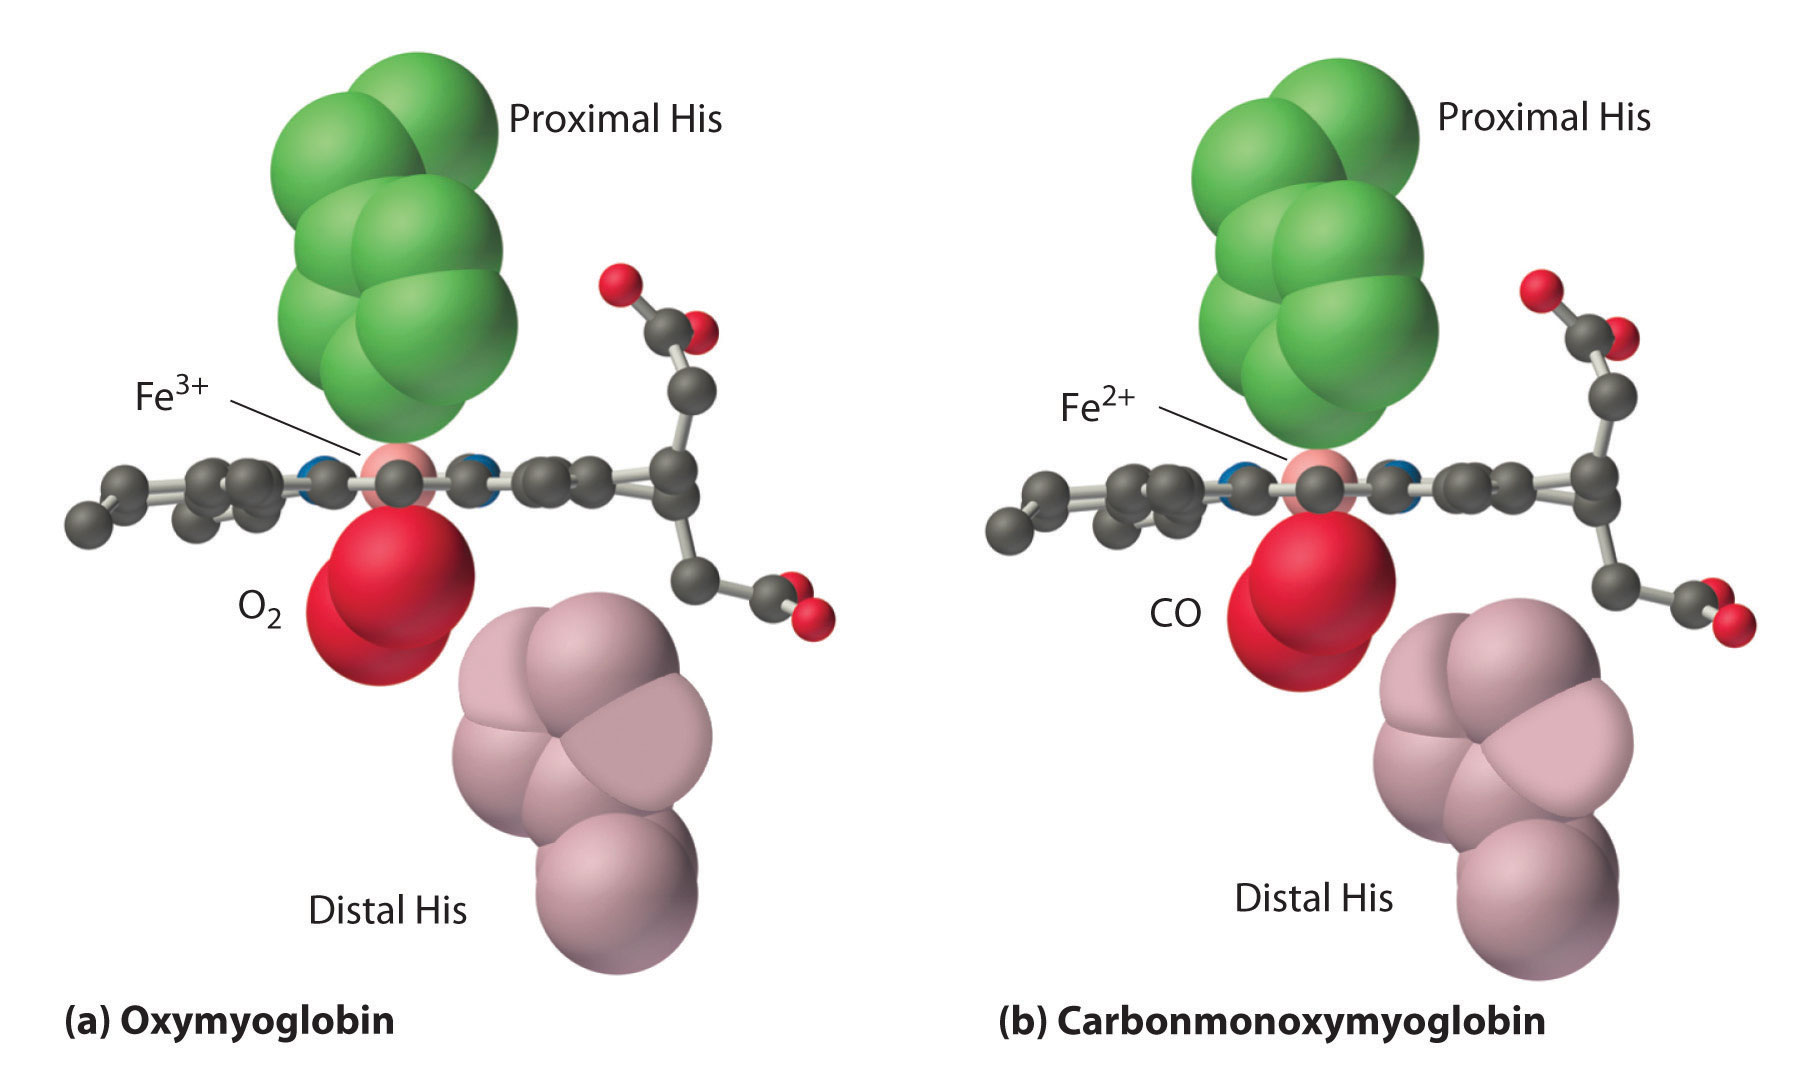 A. Side view of myoglobin shows the F e 3 positive in the center binding to the O 2 molecule forming oxymyoglobin. B. A side view of myoglobin with the F e 2 positive ion binding to the C O molecule forming carbomonoxymyoglobin. In both structures a proximal histidine and distal histidine are present. 